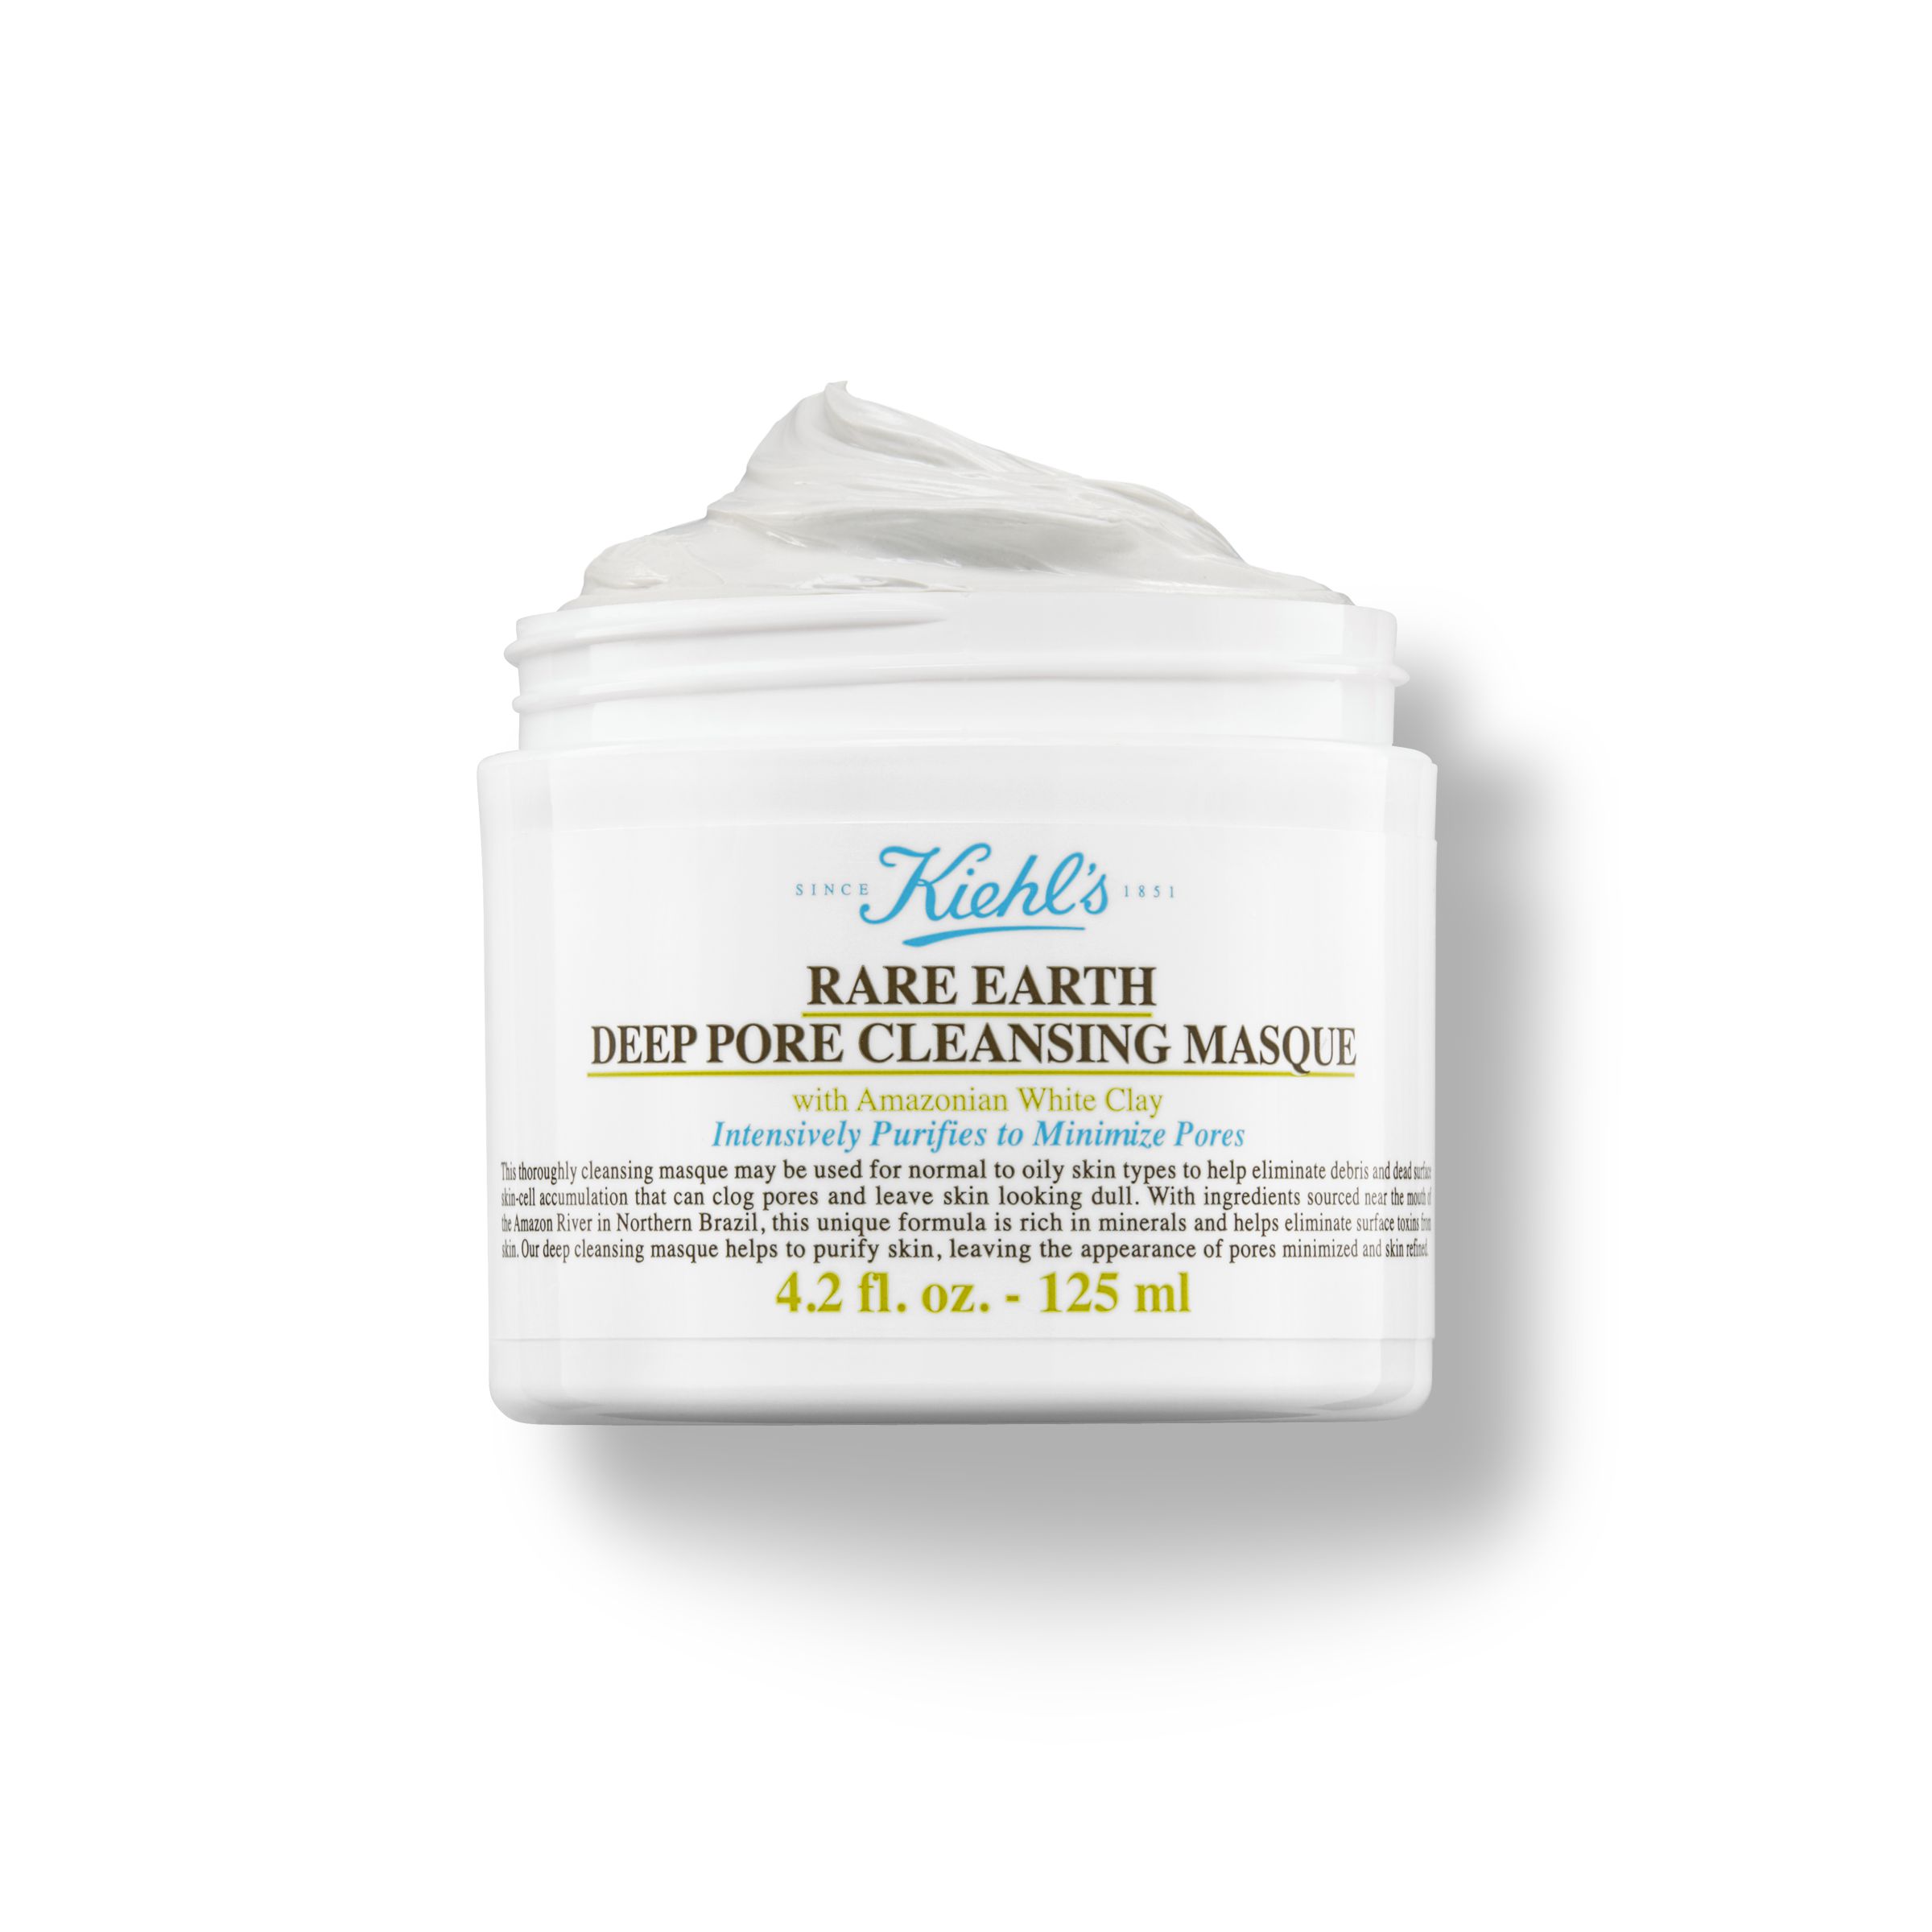 Rare Earth Pore Cleansing Masque - Facial mask - Kiehl's | Kiehls (CA)